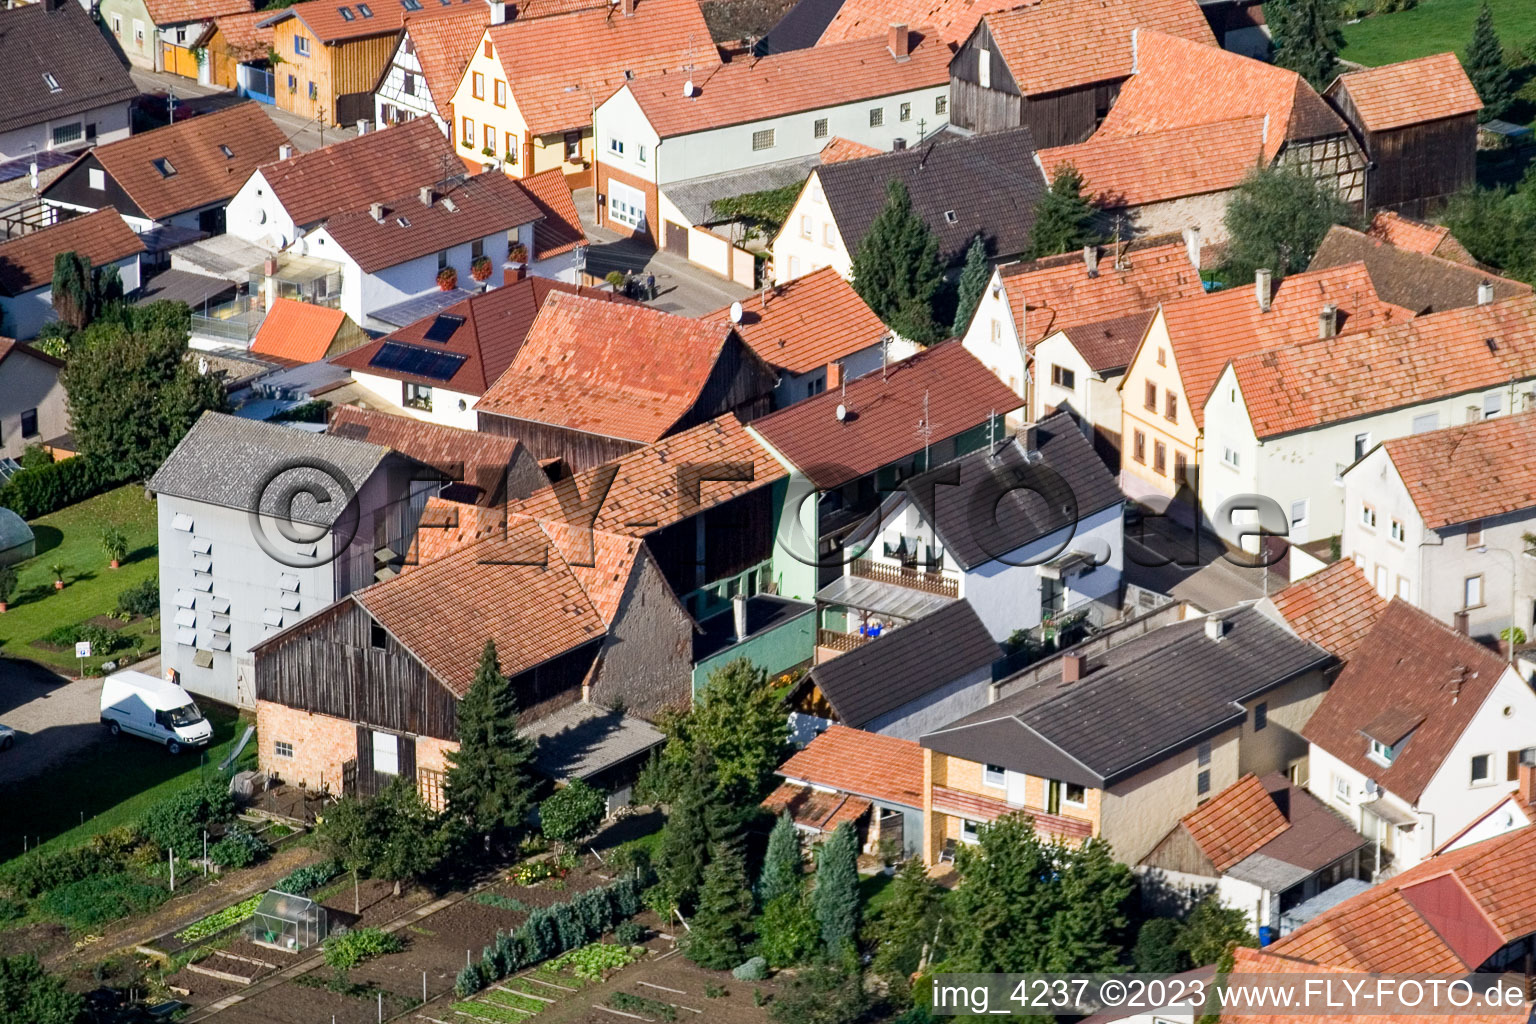 Brehmstr in the district Minderslachen in Kandel in the state Rhineland-Palatinate, Germany from above